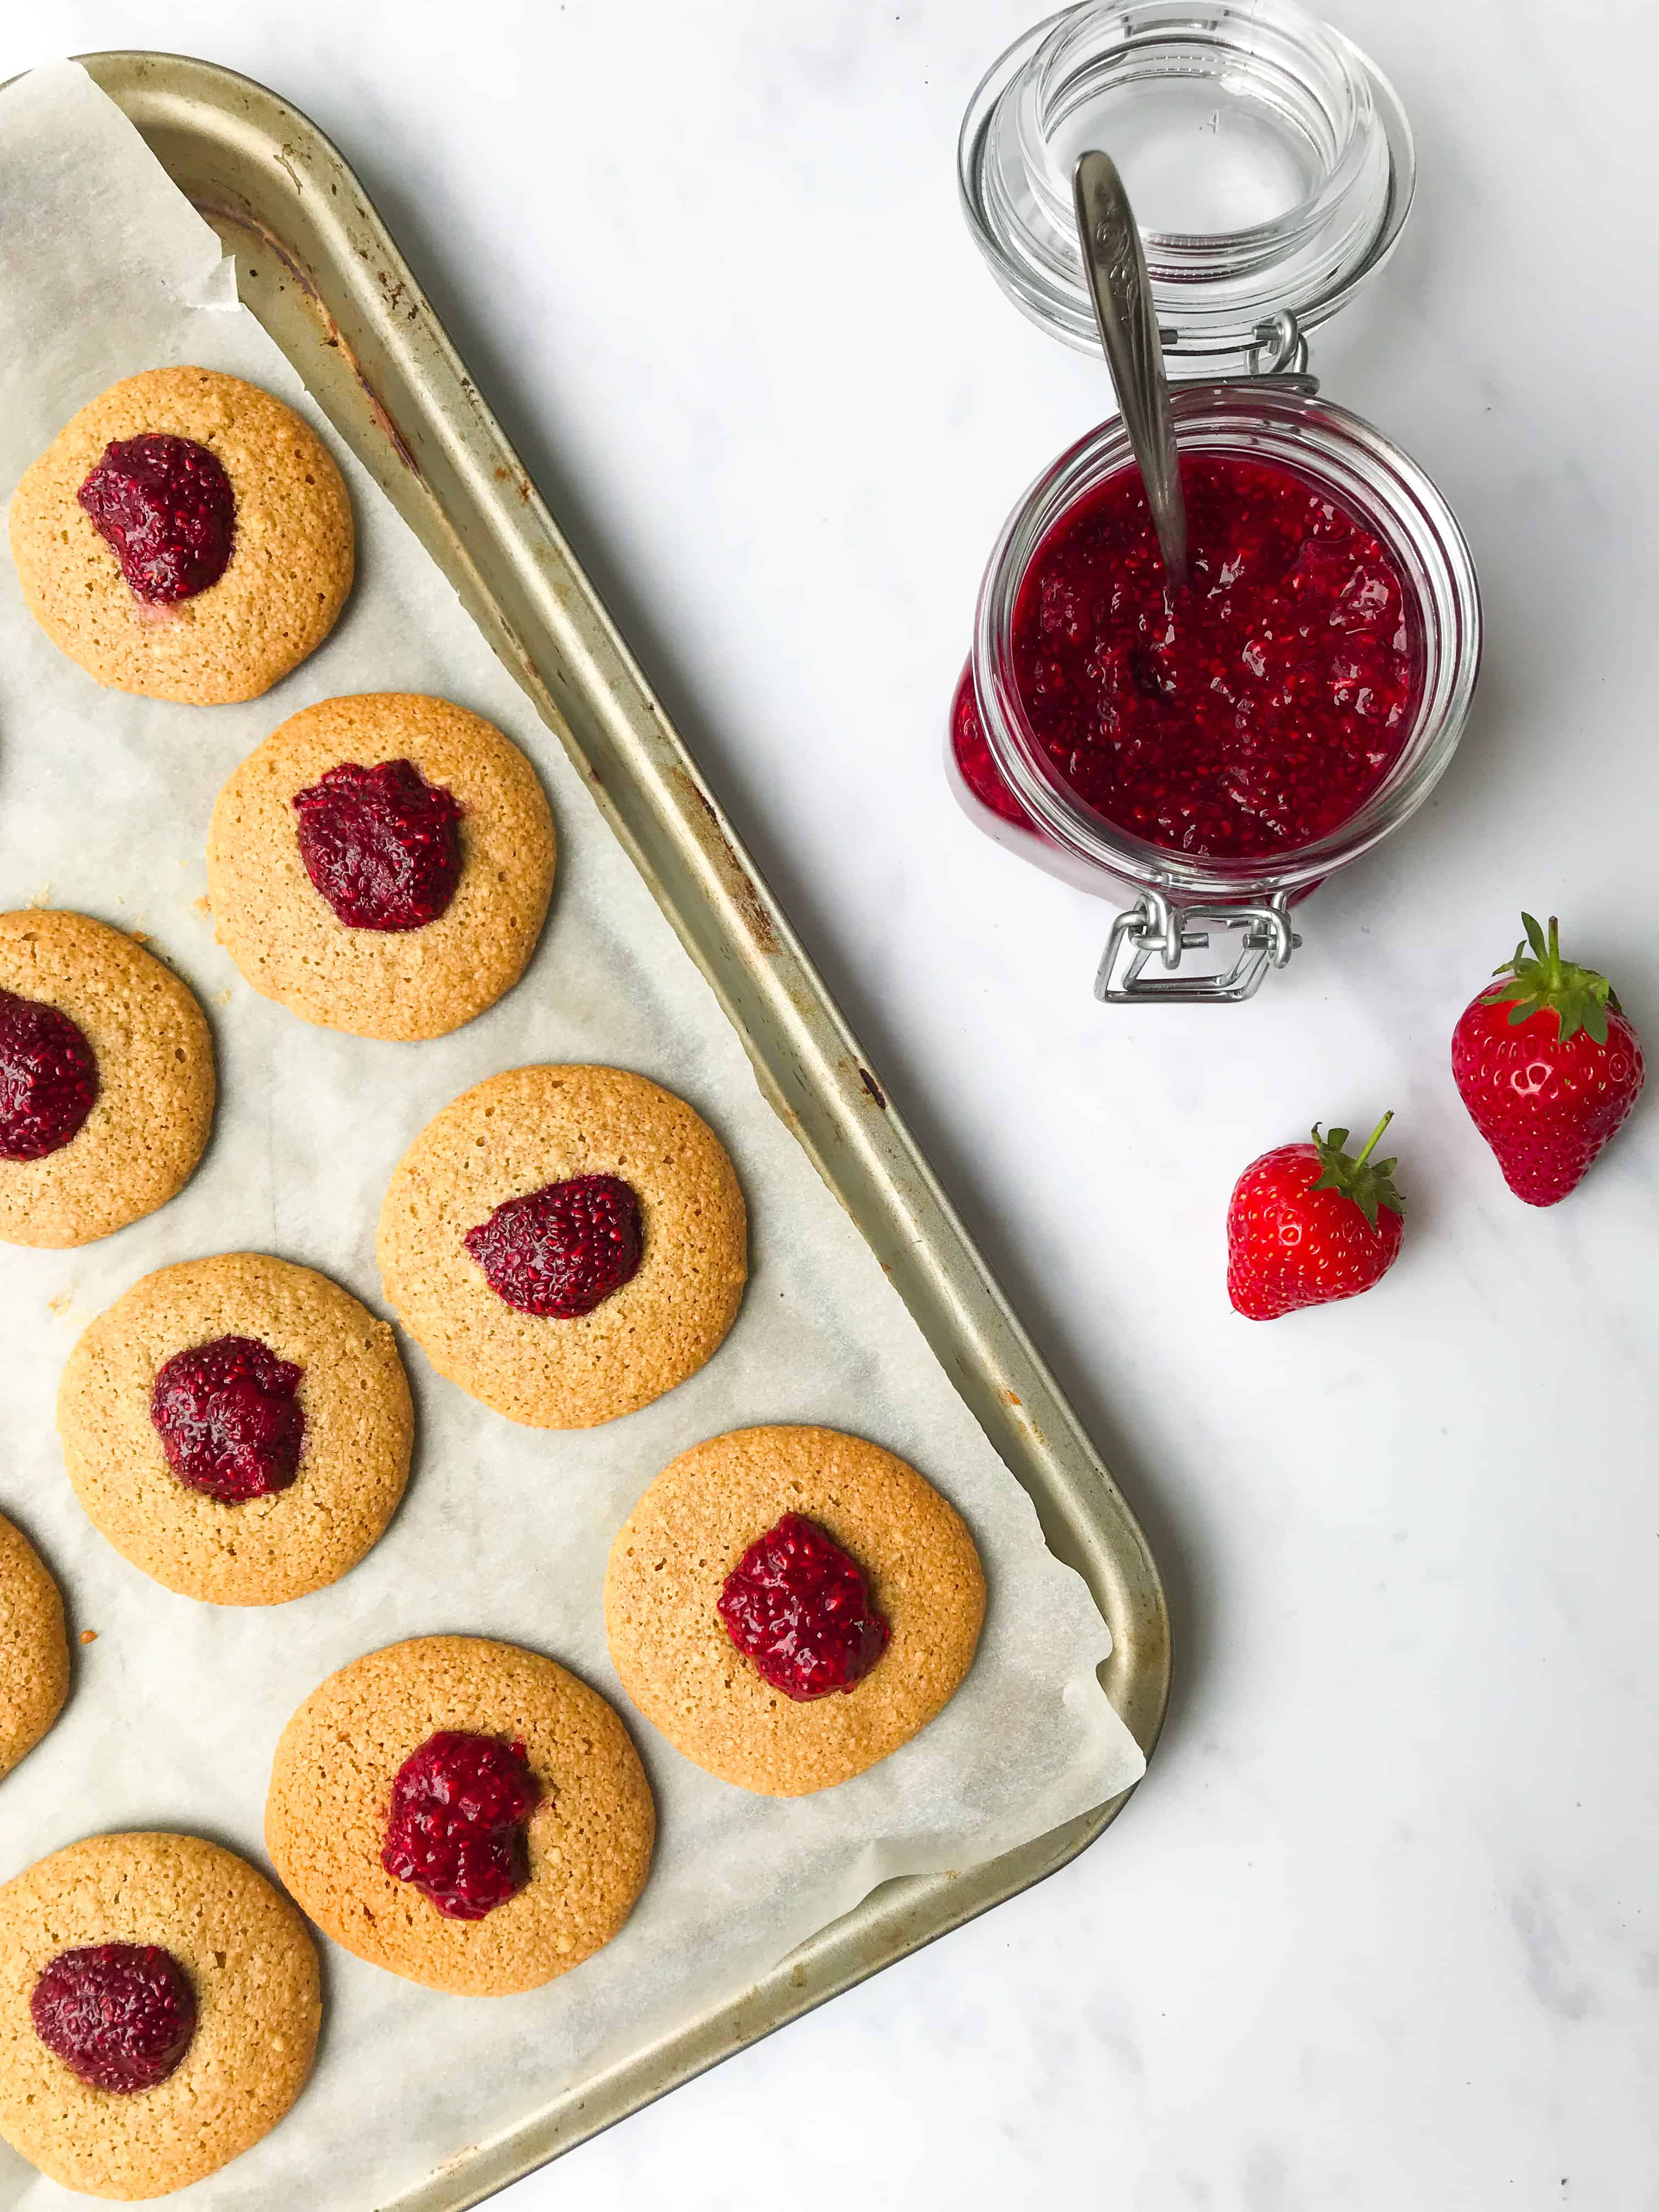 peanut butter and jam cookies